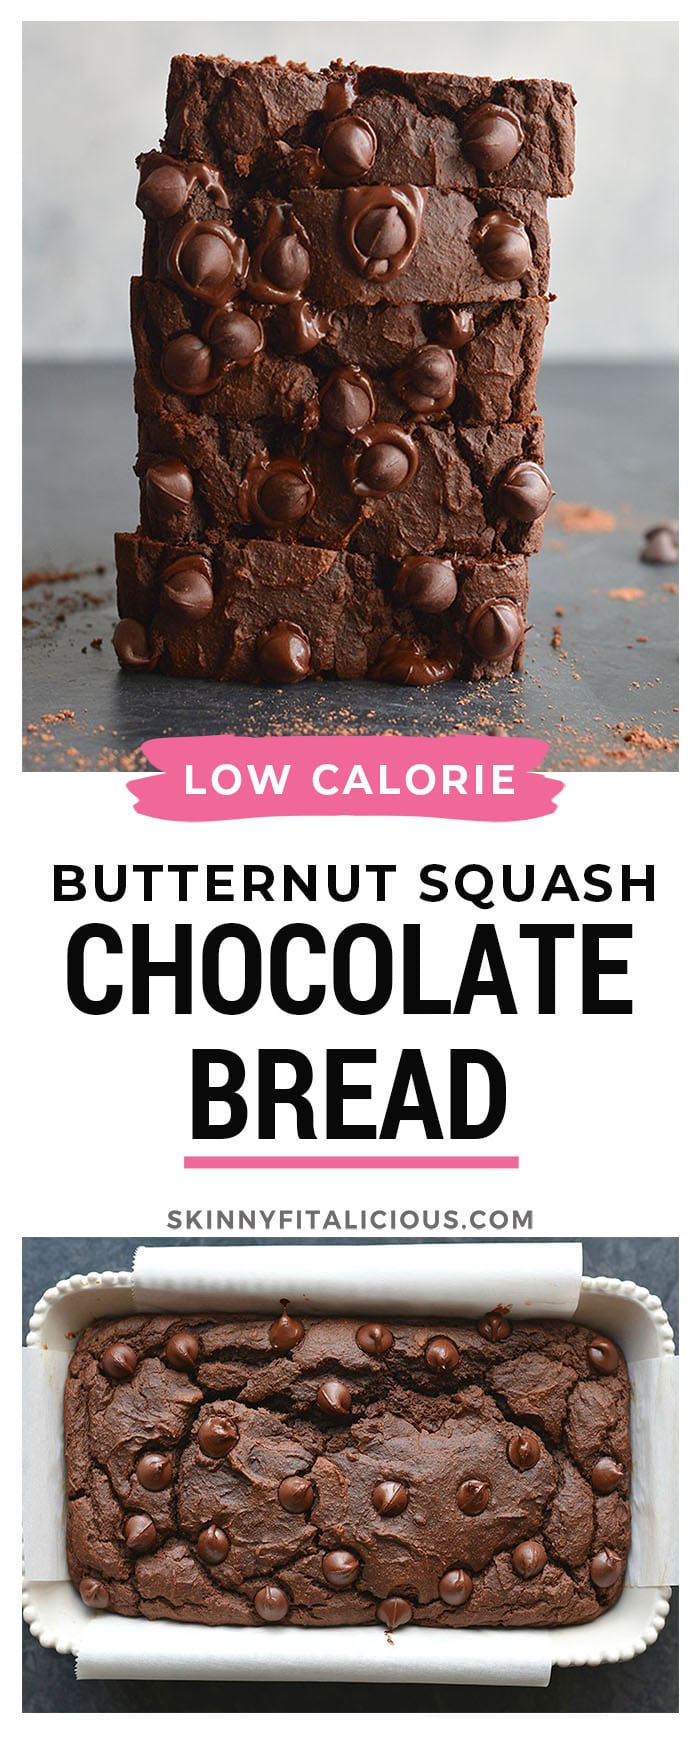 Dark Chocolate Butternut Squash Bread! Made gluten free with whole grains and lightly sweetened, this protein packed bread is a chocolate lover's dream. You won't even know it has butternut squash or is good for you!